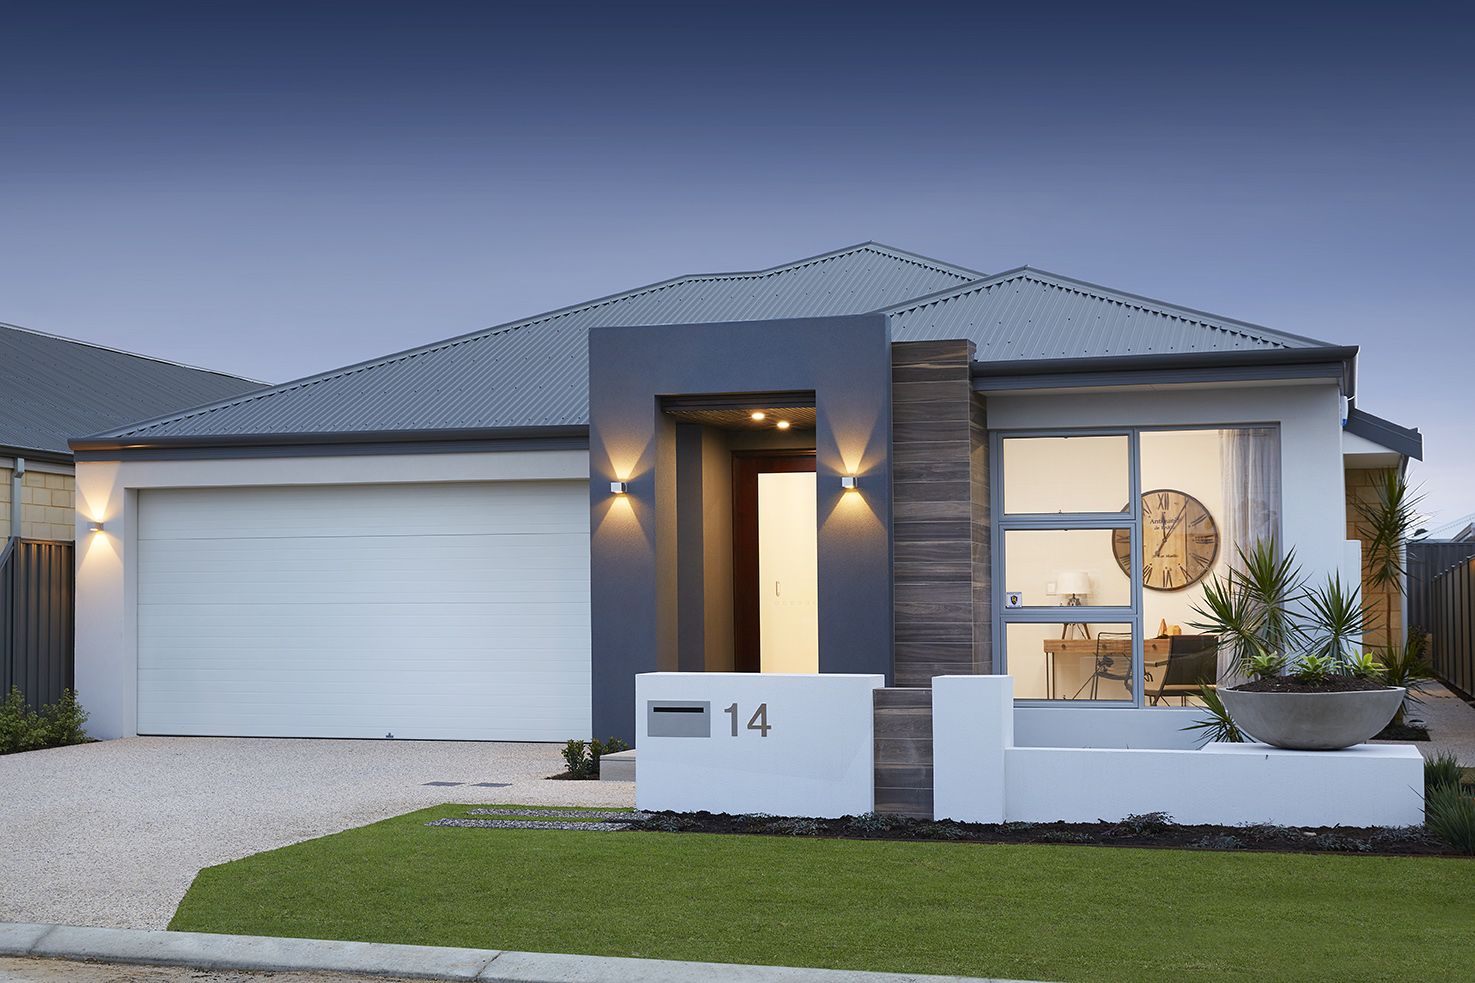 4 bedrooms New House & Land in Lot 130 Ageratum Rd SINAGRA WA, 6065